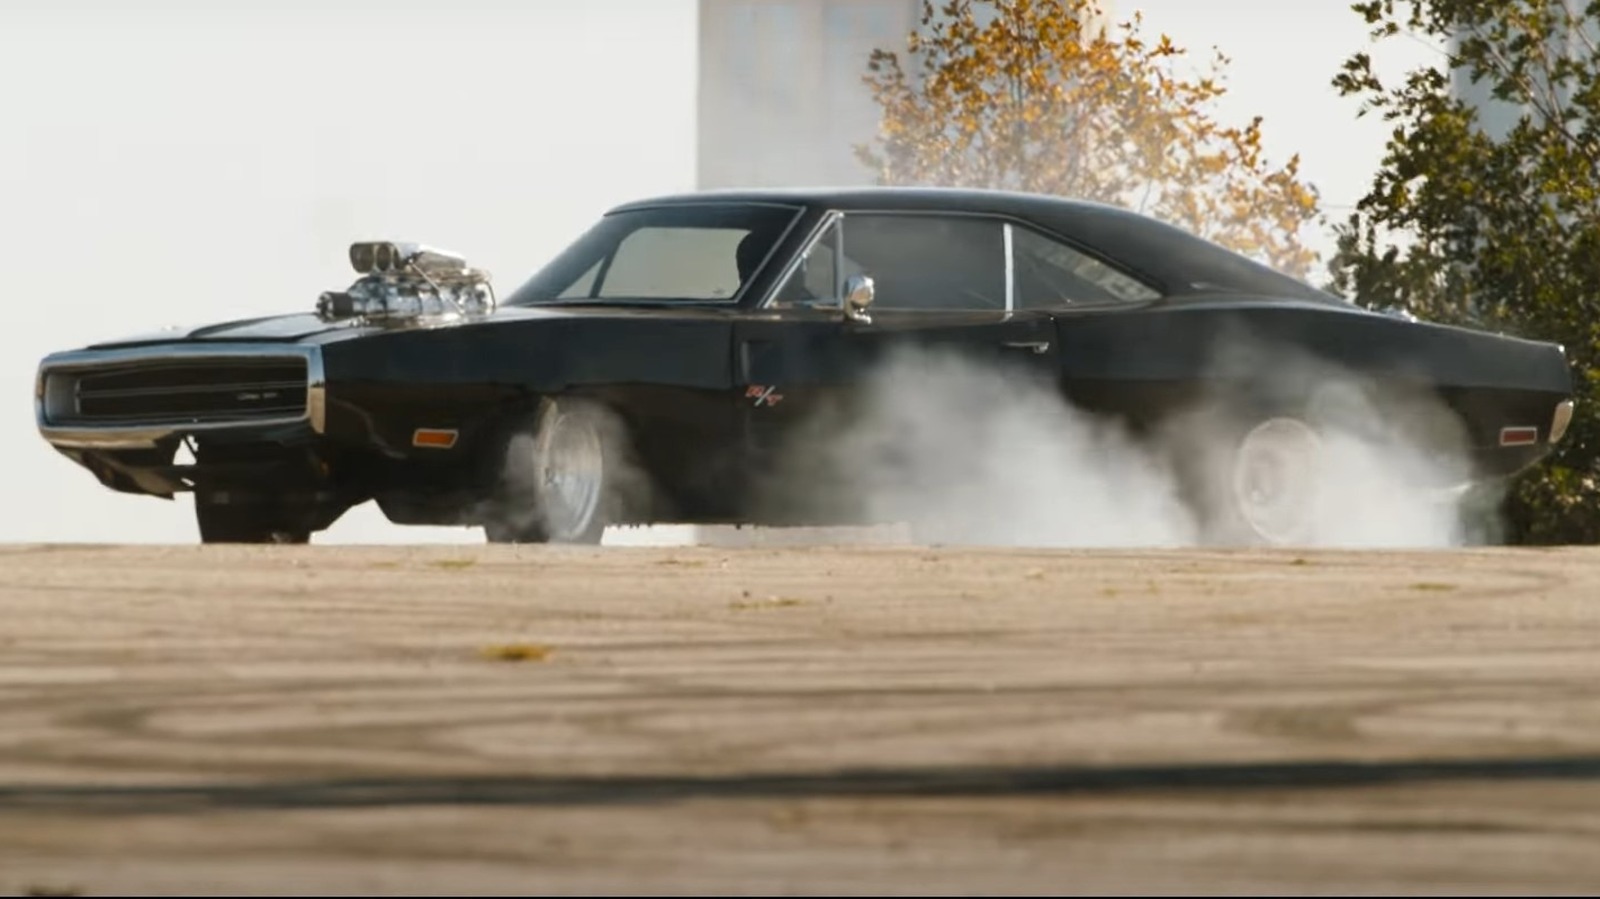 Dom's Charger from The Fast and The Furious - Fast and Furious Facts